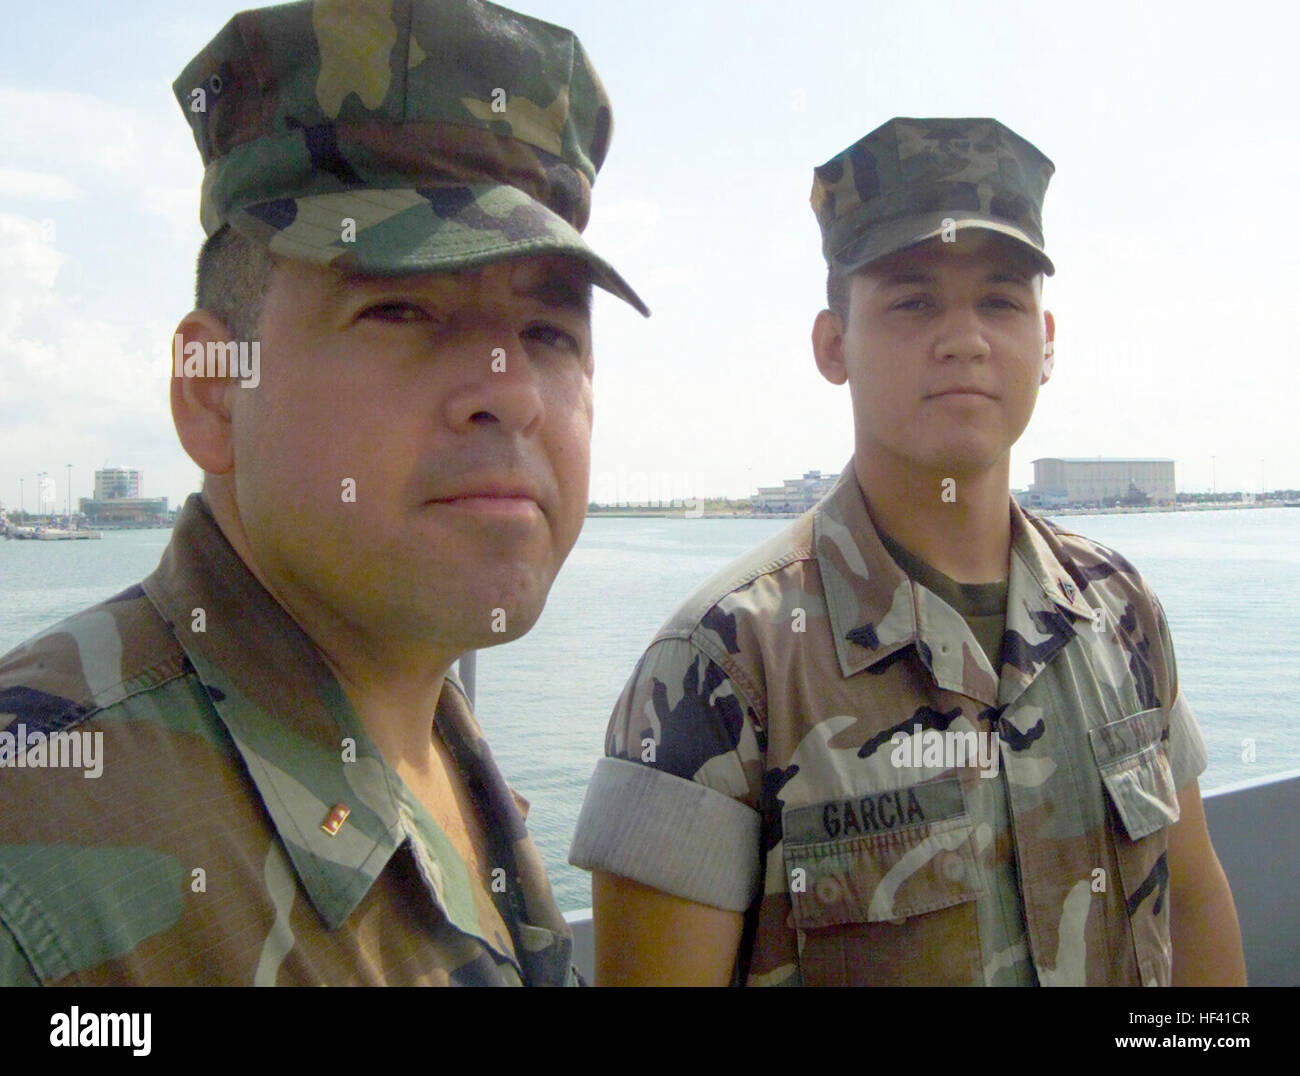 020722-M-2706G-018 Aboard USS Denver (LPD-9) inport Singapore (Jul. 22, 2002) -- Chief Warrant Officer Armando Garcia and his son, Cpl. Armando Garcia, stand on the flight deck of USS Denver.  Both father and son are deployed to the Western Pacific with the U.S. MarinesÕ Battalion Landing Team 3/1, 11th Marine Expeditionary Unit (MEU) Special Operations Capable (SOC) to the Western Pacific conducting missions in support of Operation Enduring Freedom.  U.S. Marine Corps photo.  (RELEASED) US Navy 020722-M-2706G-018 Father 5E Son reunite in Singapore Stock Photo